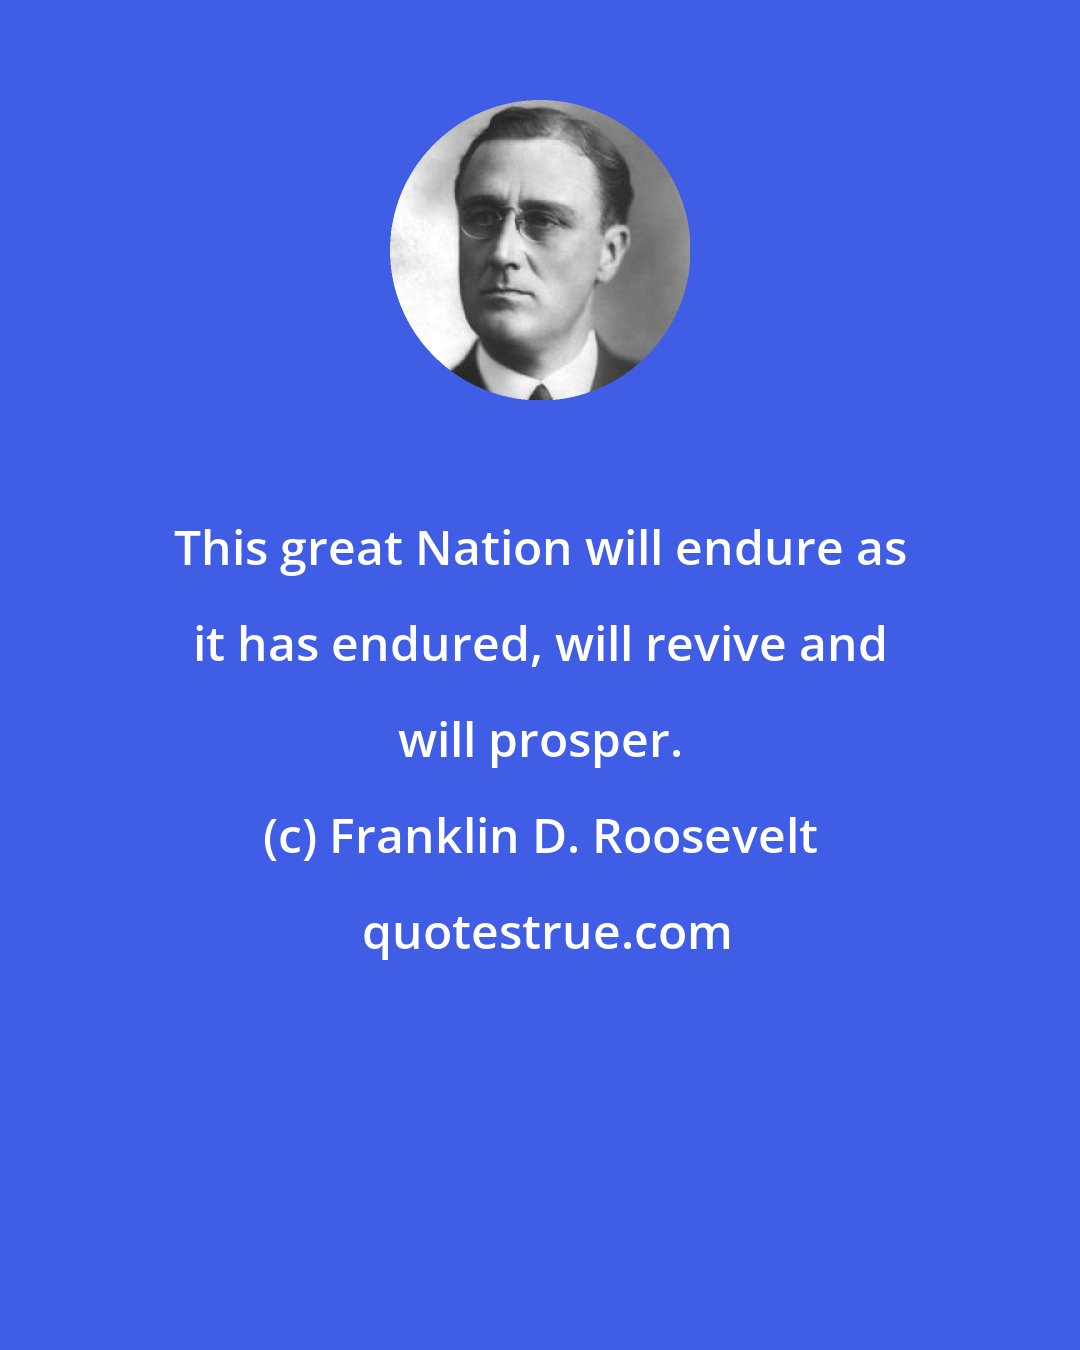 Franklin D. Roosevelt: This great Nation will endure as it has endured, will revive and will prosper.